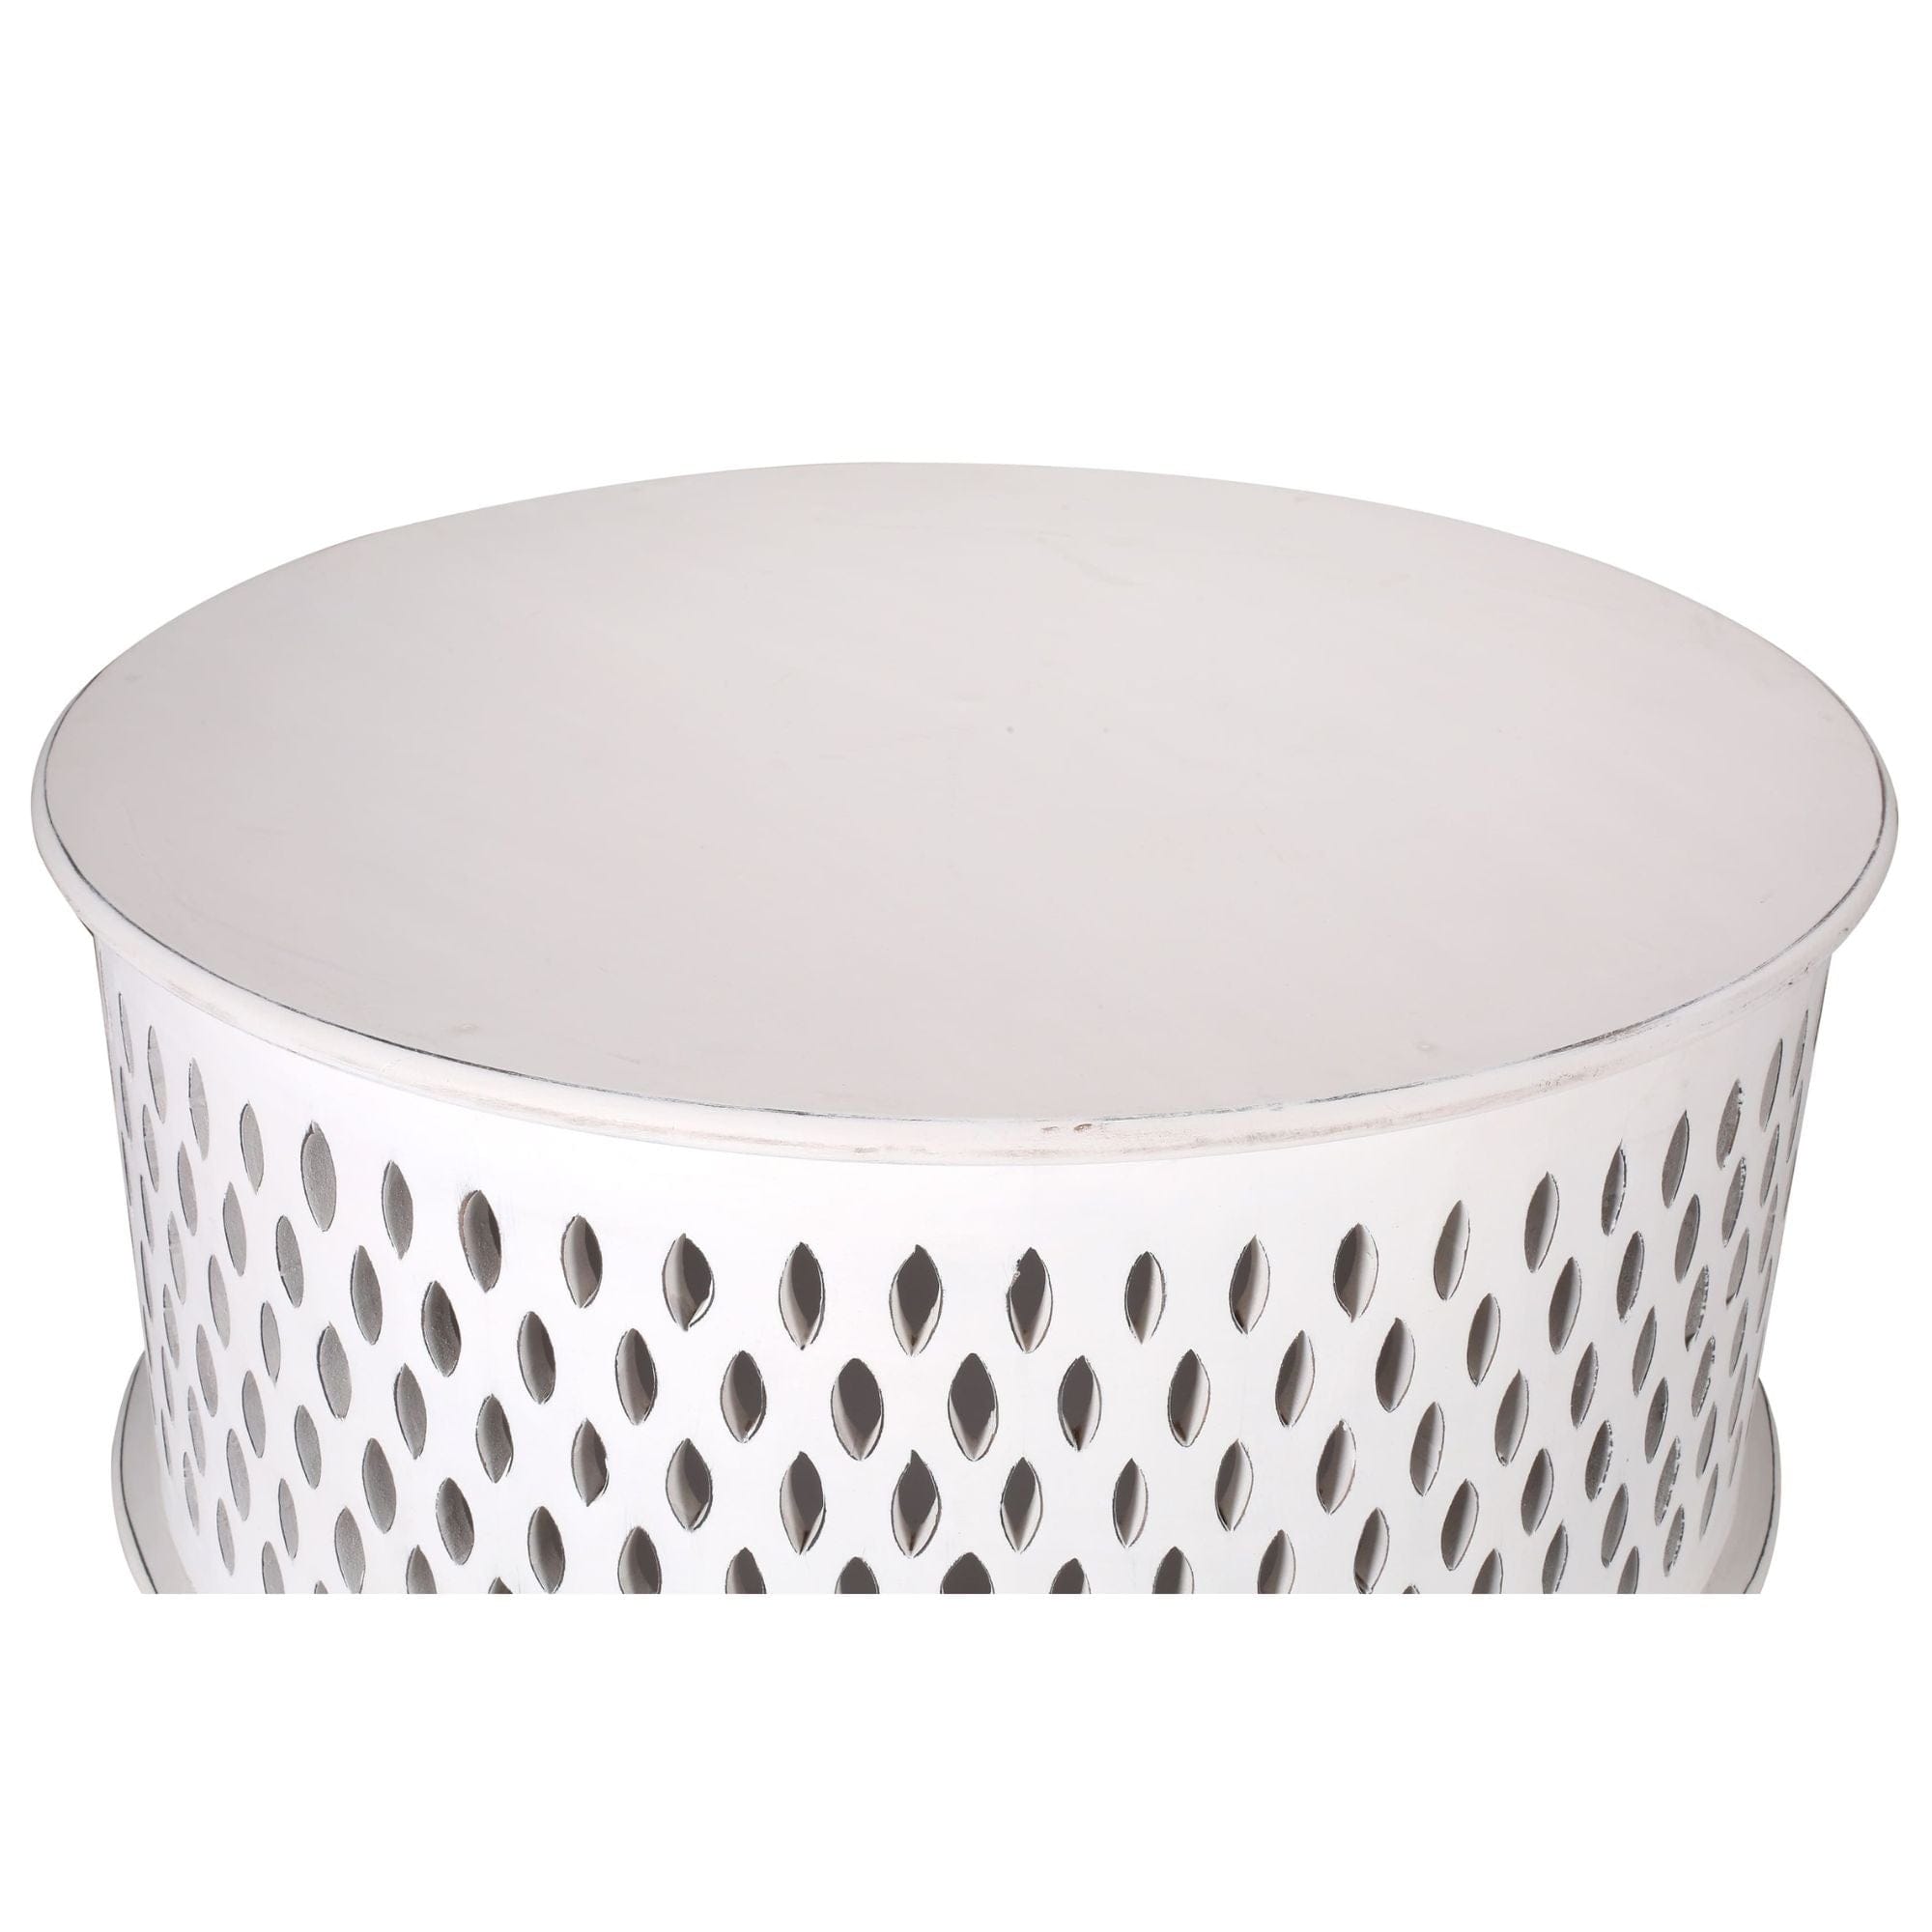 Wooden Round 80cm Coffee Table - White